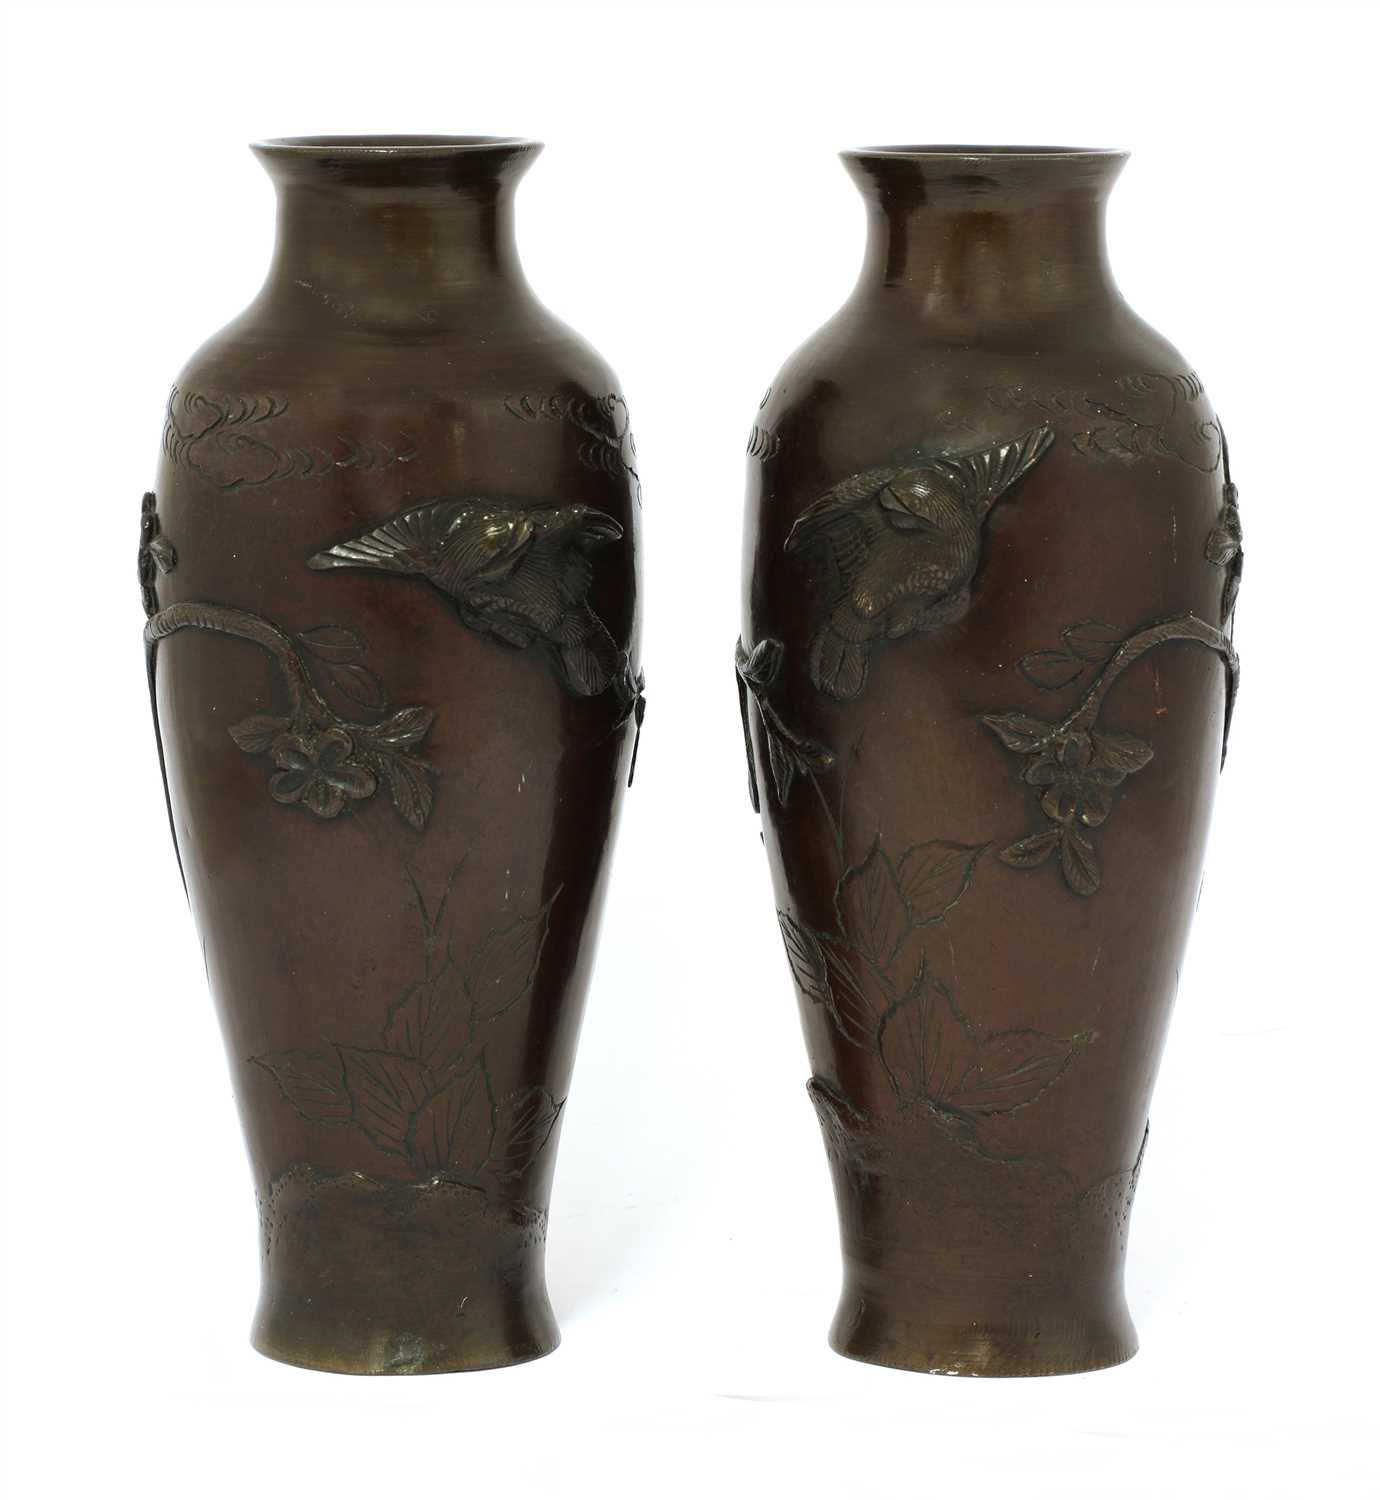 Lot 526 - A pair of Japanese bronze vases